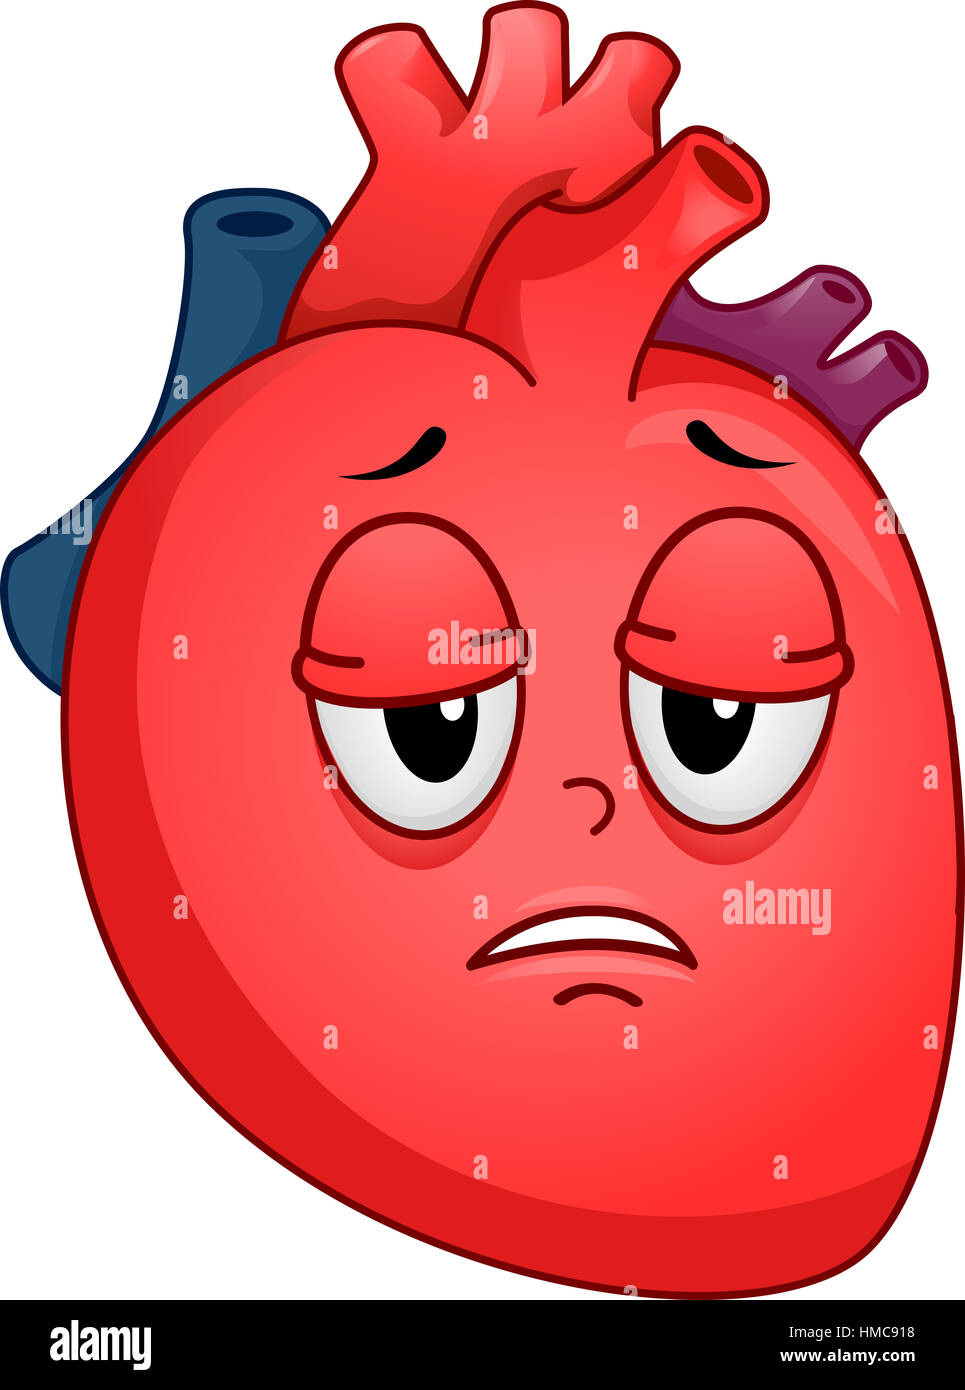 Mascot Illustration of an Unhealthy Human Heart Suffering from Fatigue ...